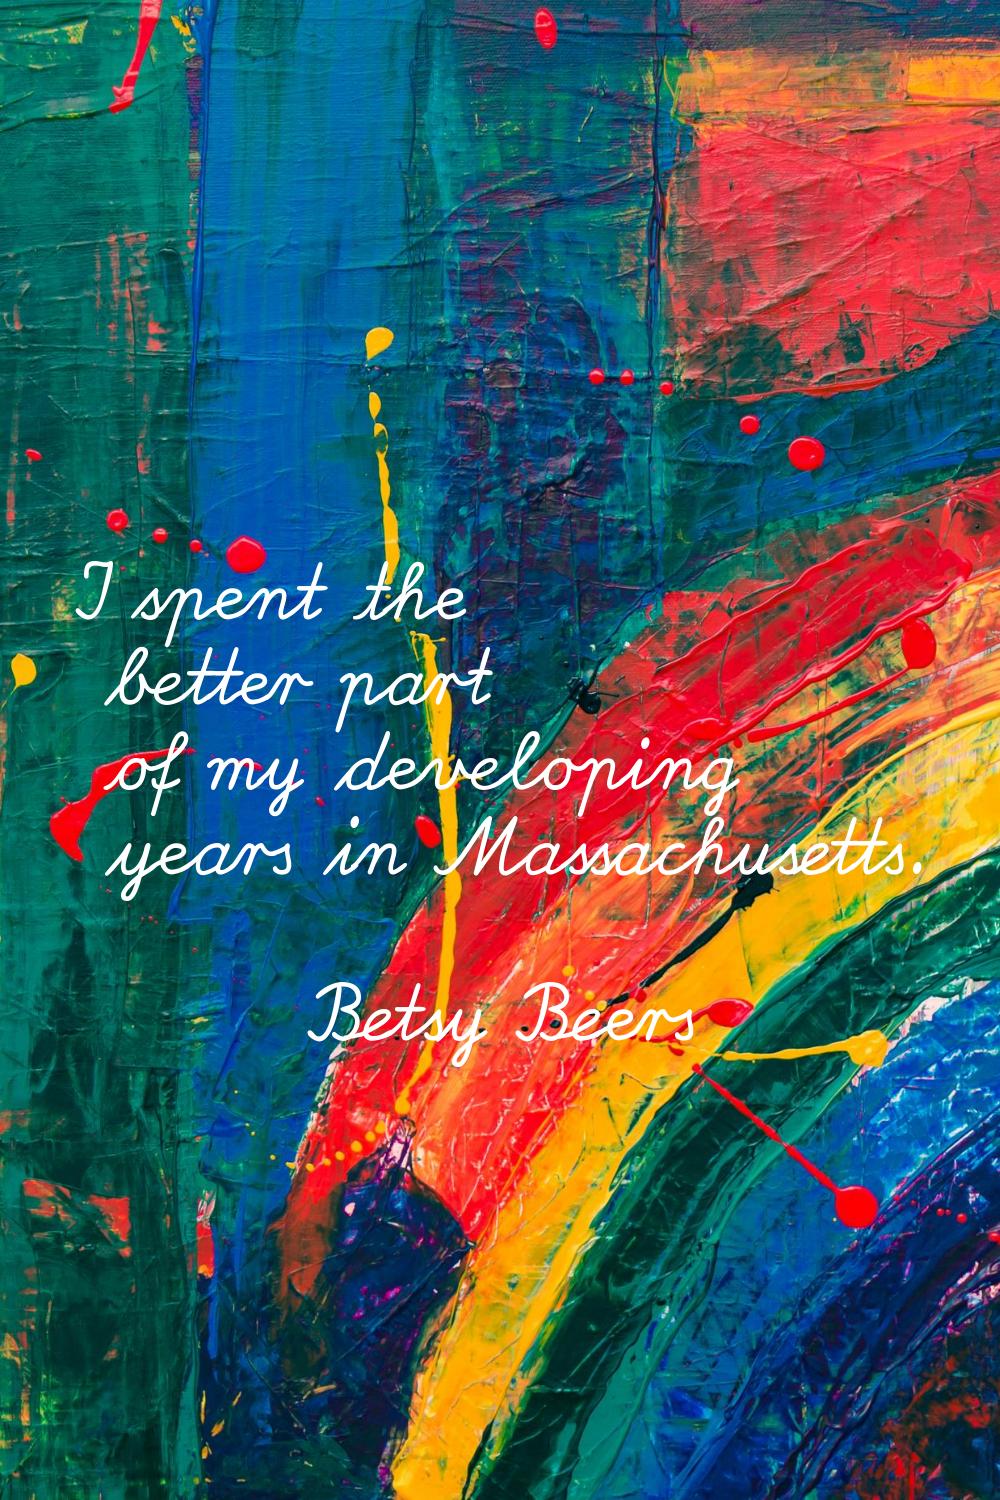 I spent the better part of my developing years in Massachusetts.